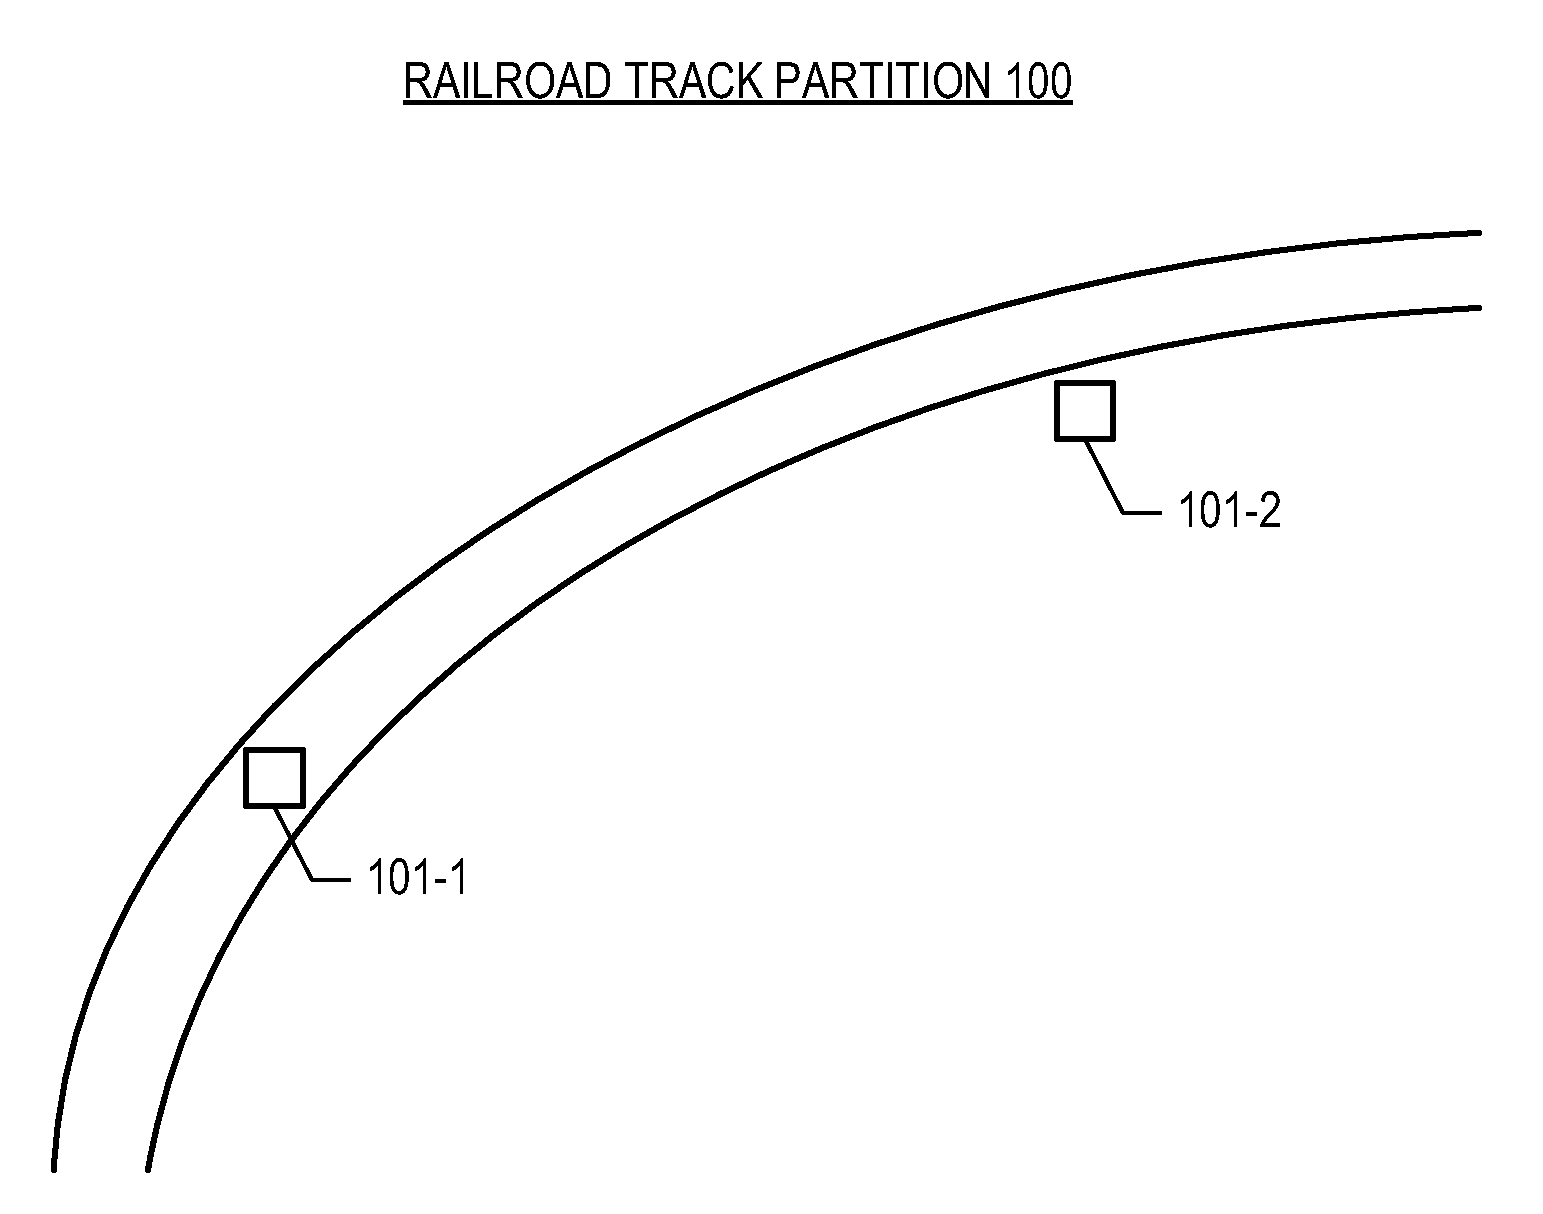 Database For Efficient Storage of Track Geometry and Feature Locations